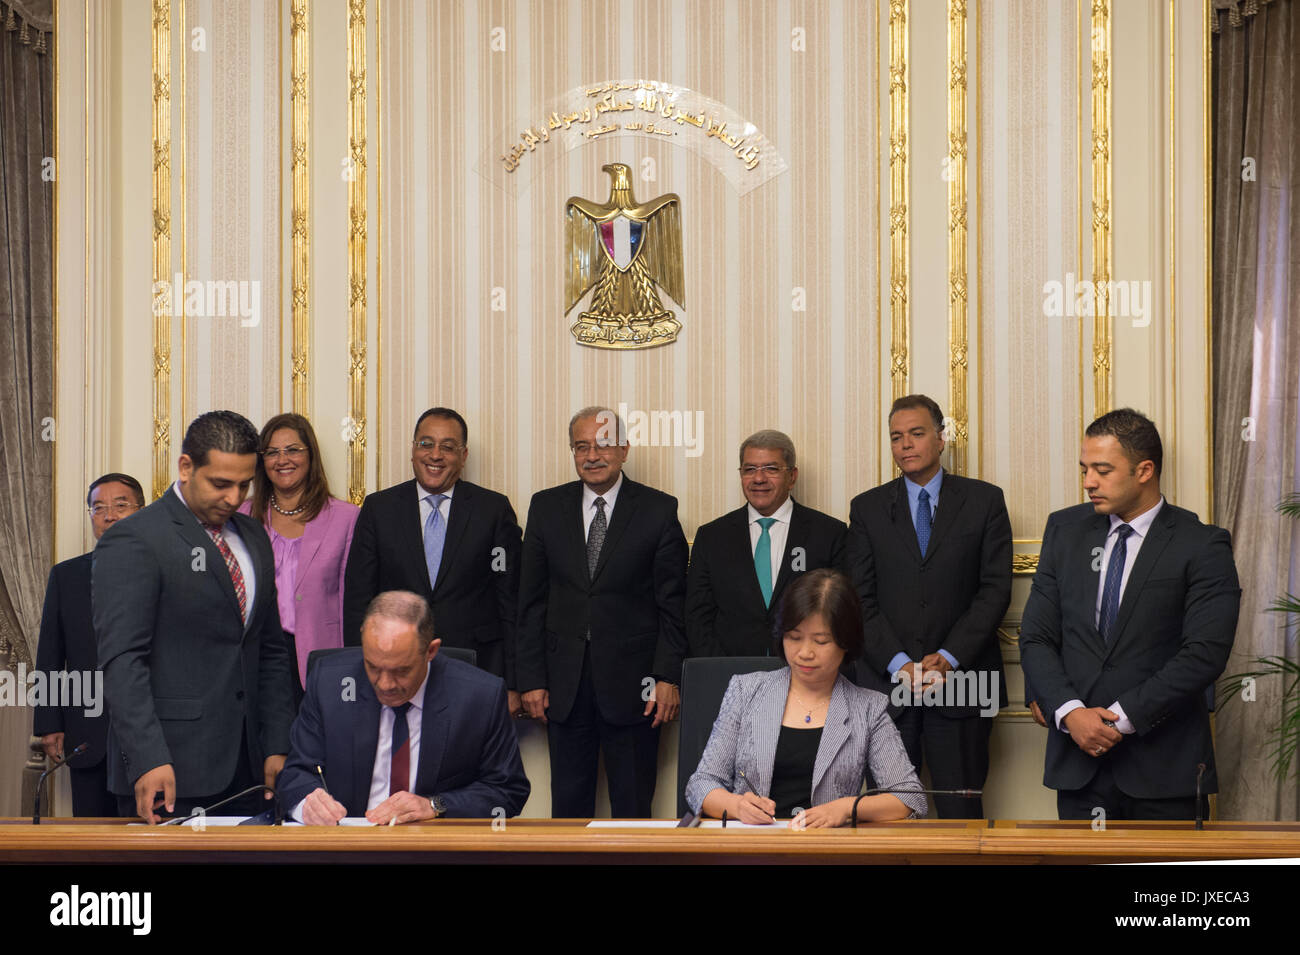 Cairo, Egypt. 15th Aug, 2017. Egyptian Prime Minister Sherif Ismail (4th R, Rear) attends the signing ceremony between Egypt's National Authority for Tunnels (NAT) and the joint coalition of China's AVIC International and China Railway Group Limited in Cairo, Egypt, on Aug. 15, 2017. The Egyptian Ministry of Transport and a coalition of Chinese firms signed on Tuesday an agreement worth 1.24 billion U.S. dollars to build a light rail transit in new districts around Cairo. Credit: Meng Tao/Xinhua/Alamy Live News Stock Photo